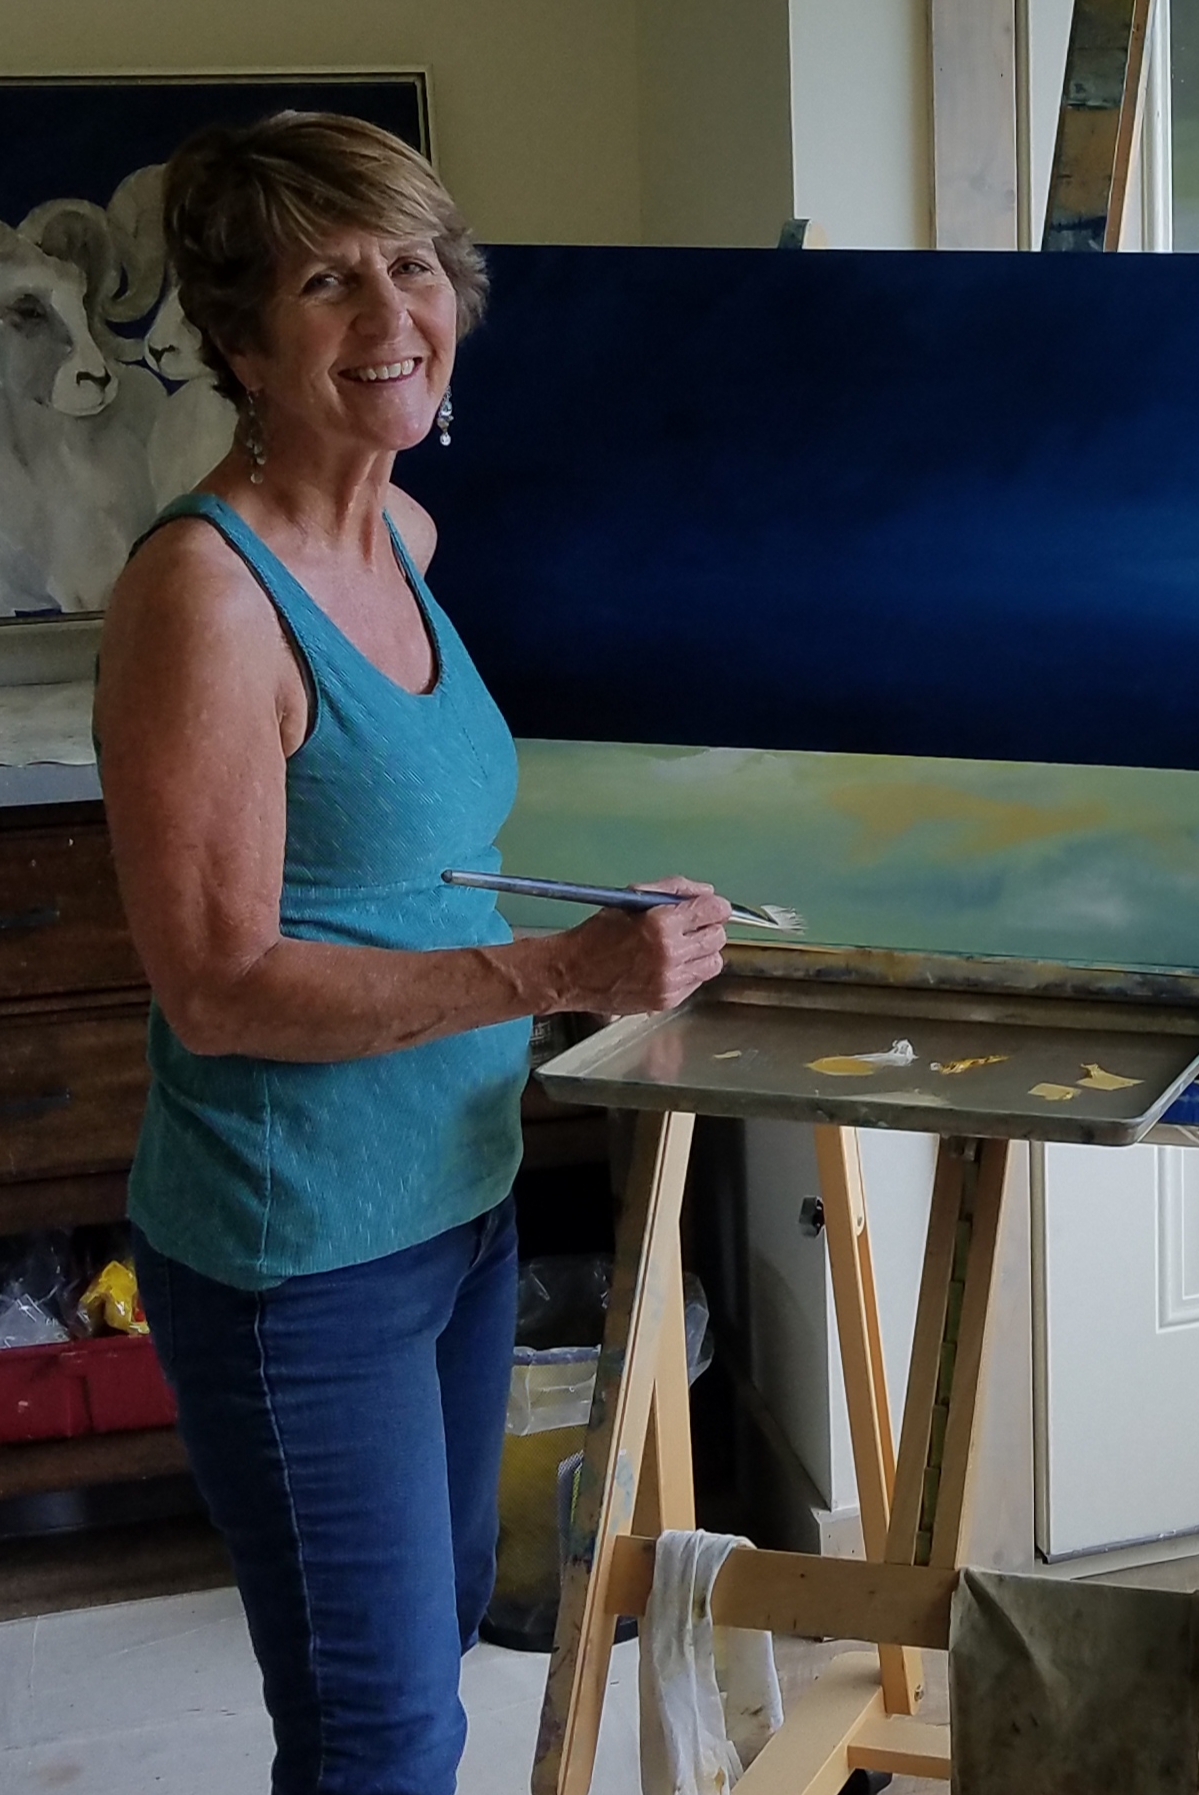 Big Sky Artists Collective to offer online painting event | Explore Big Sky